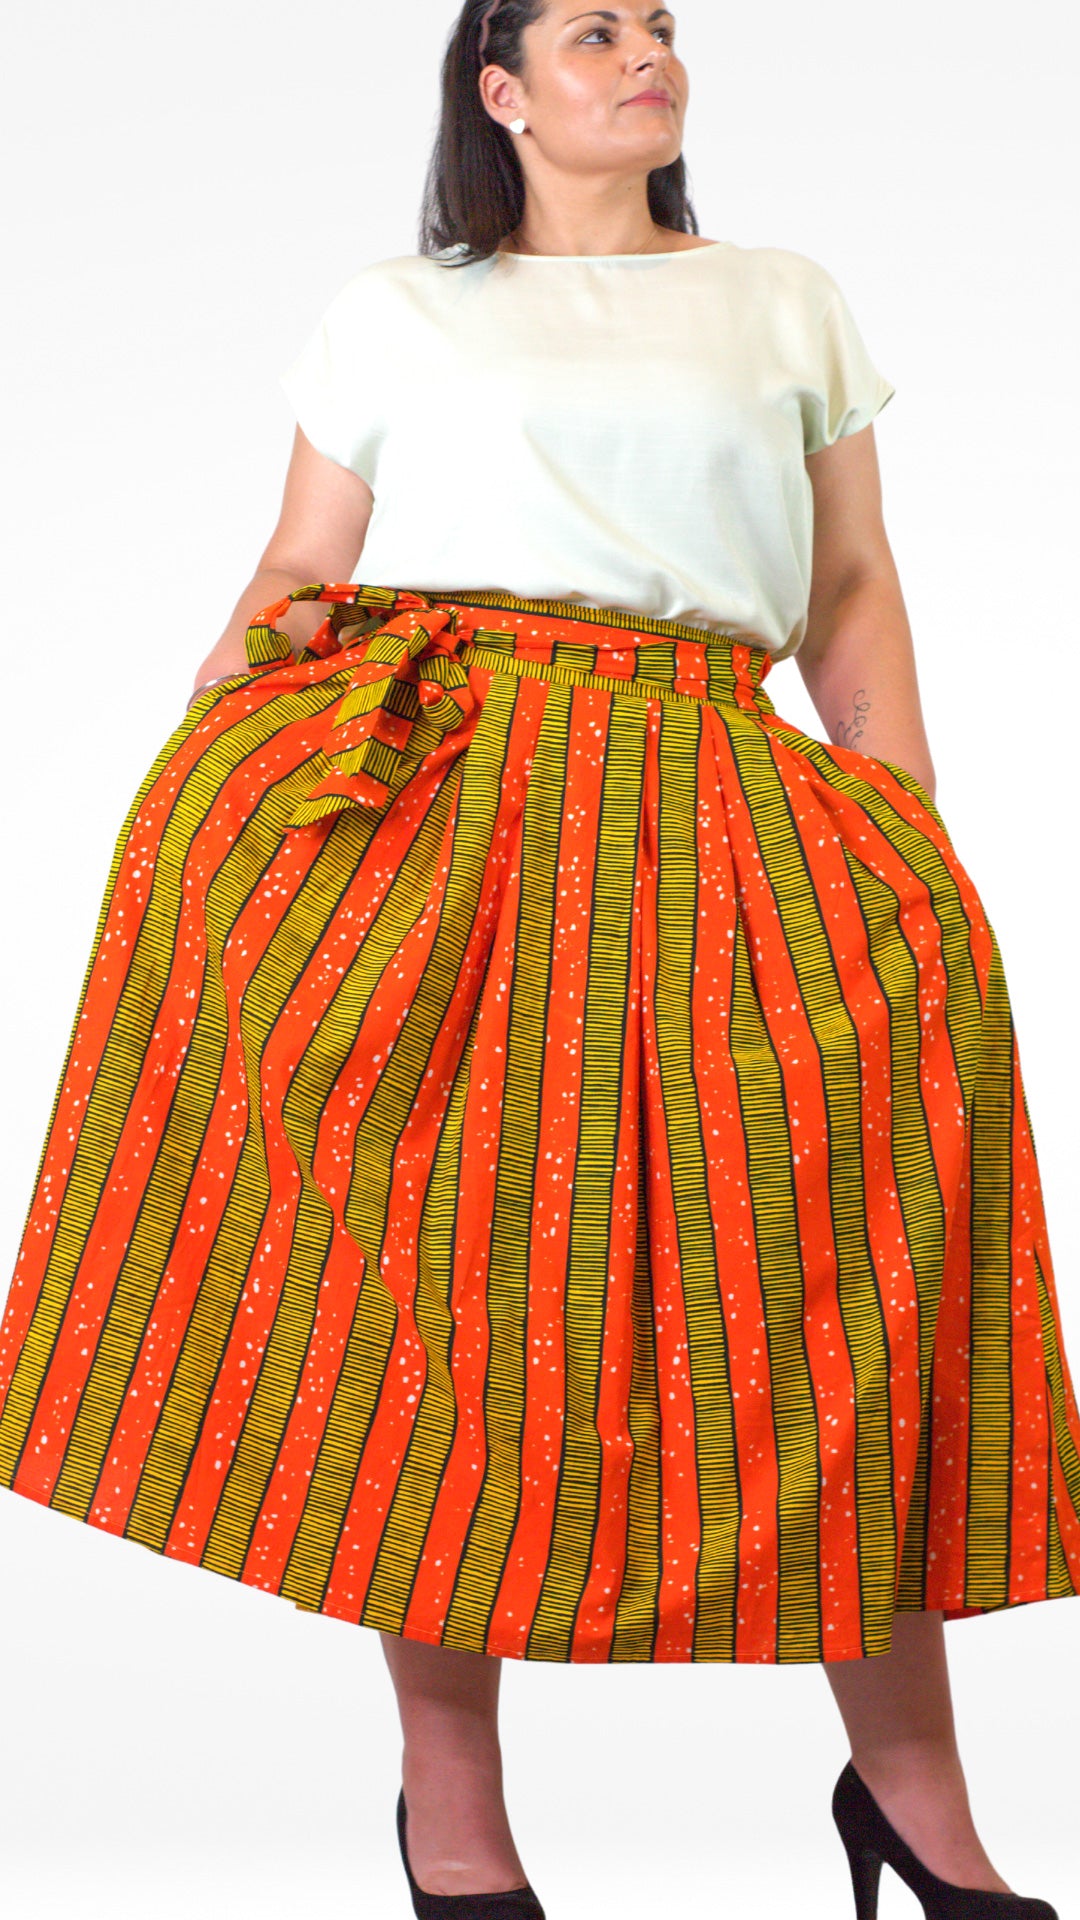 a person in a orange yellow striped skirt wearing a white top and black heels and posing with arms on waist standing confidently